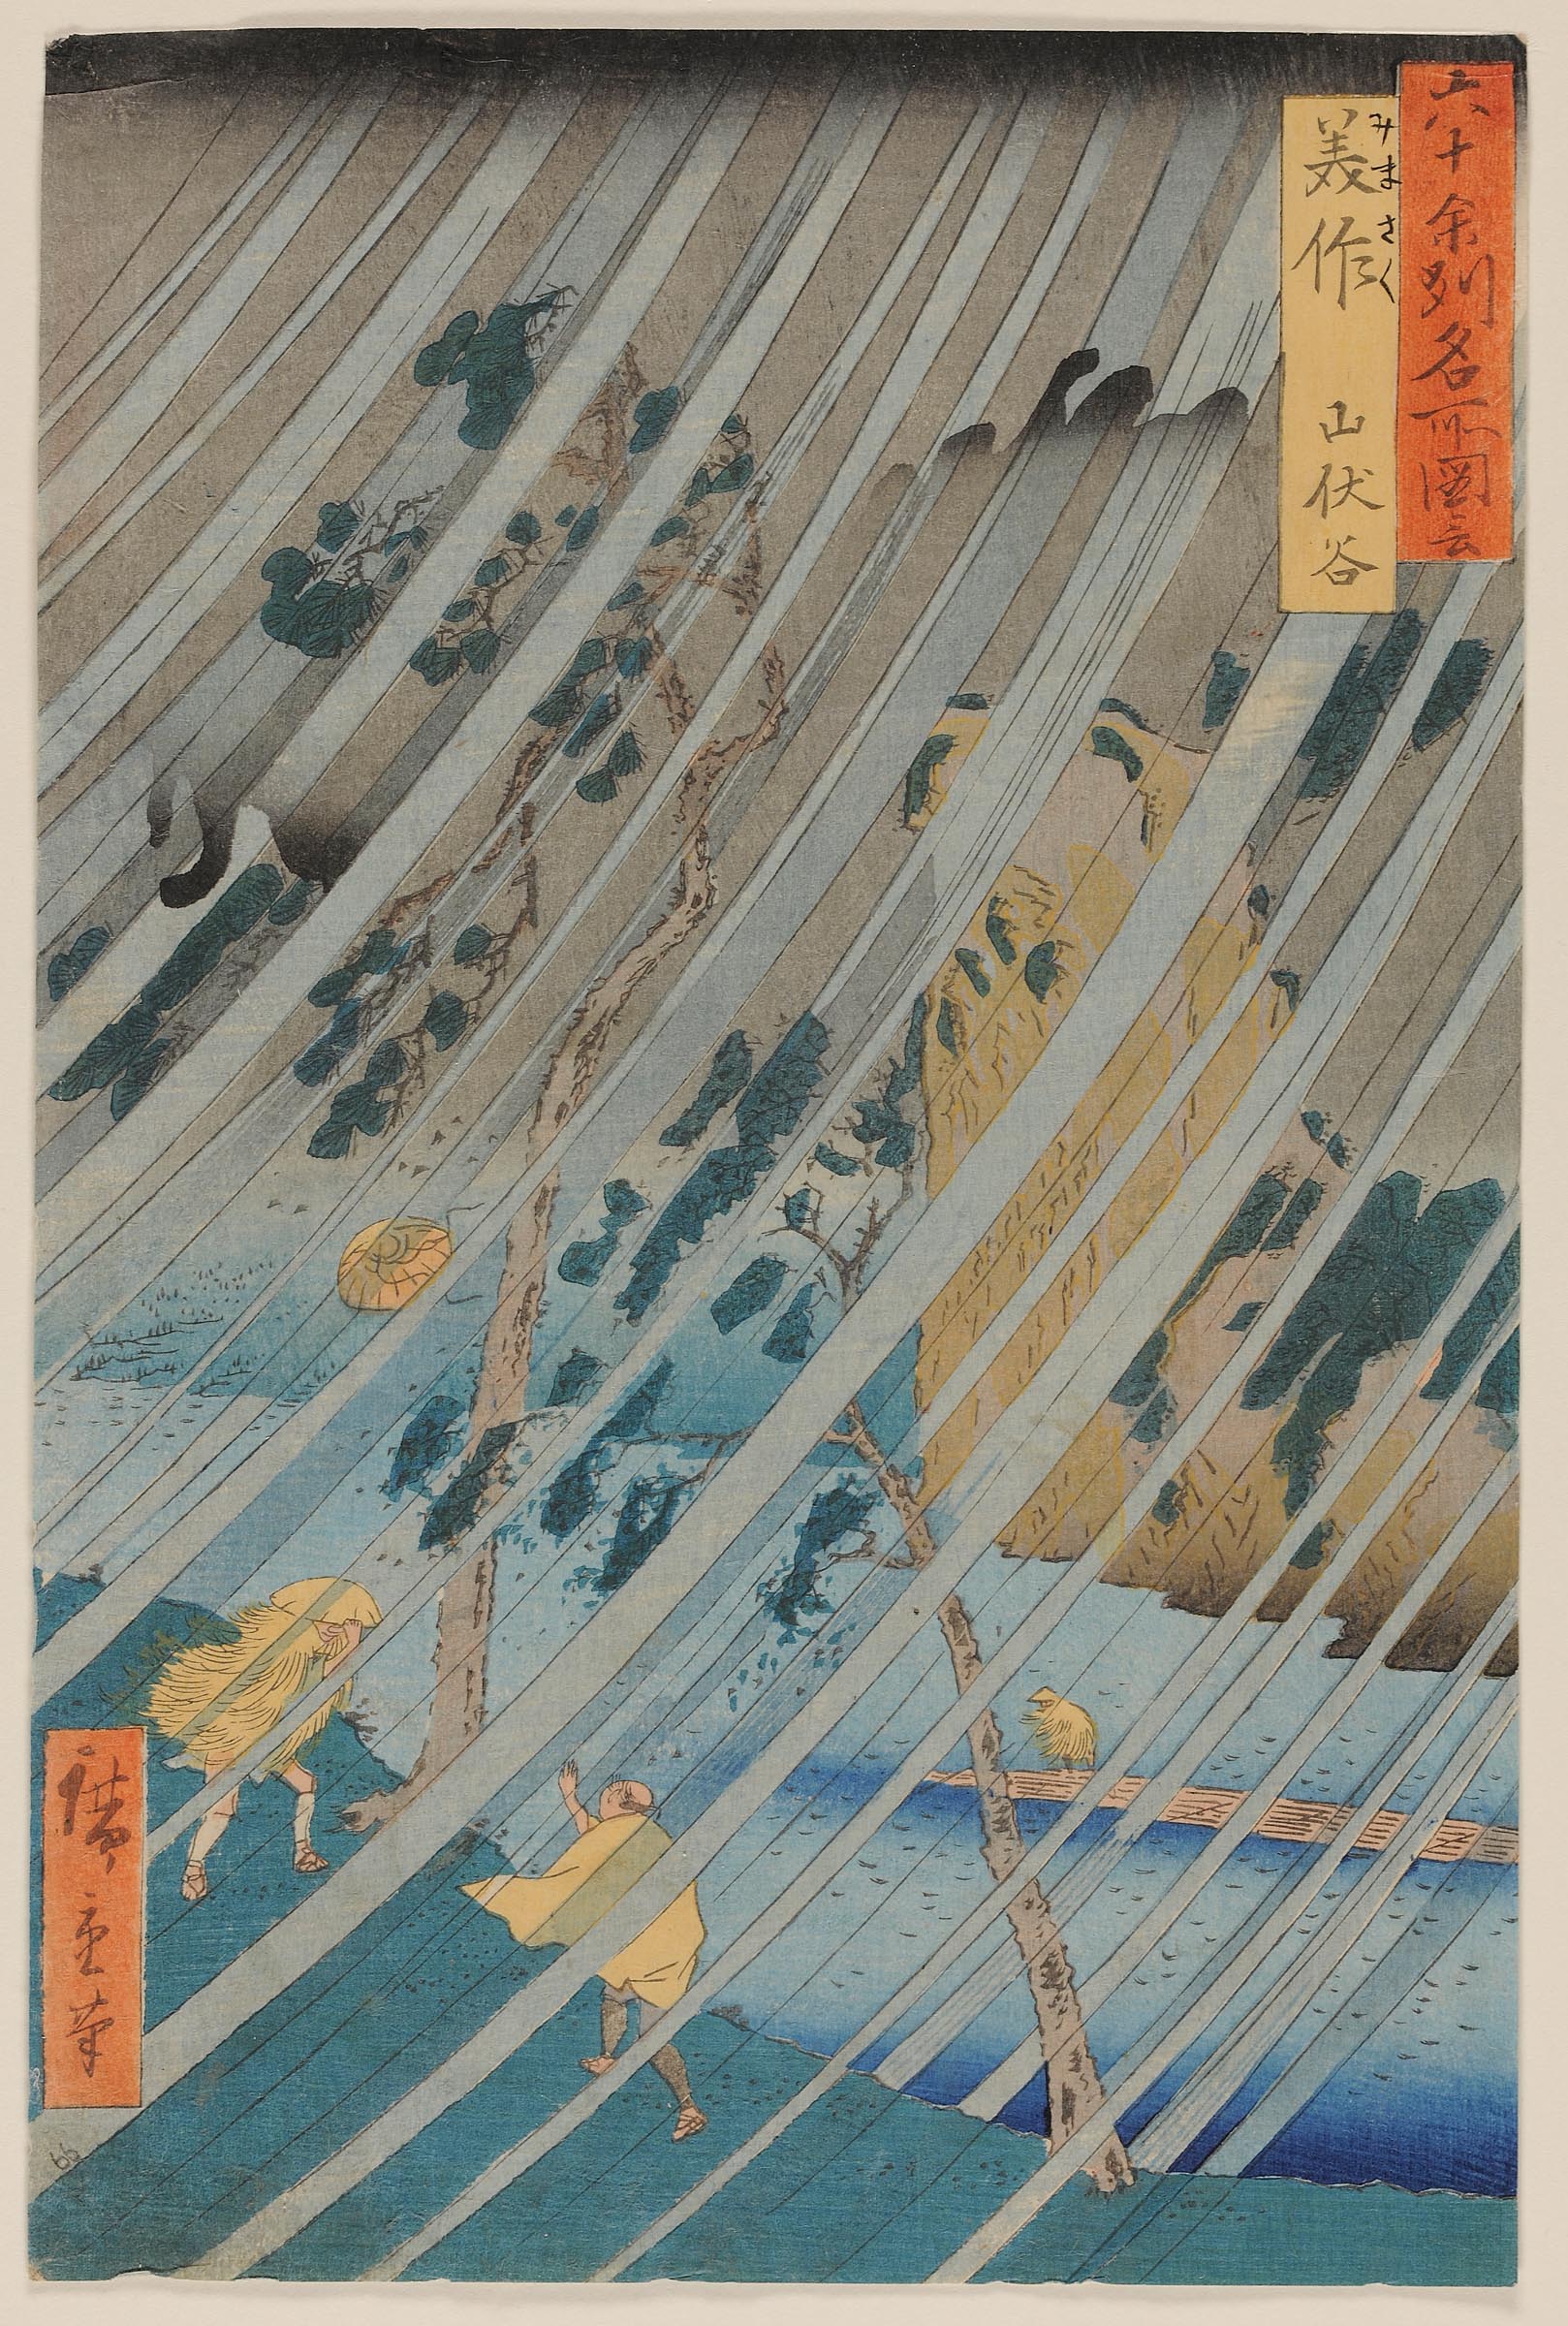 Three small figures stand in the wind. Two are holding harvested grain and the other is wearing a loose yellow garment. Two trees blow in the wind and rain with a river and mountain in the background. Stripes of rain and wind are depicted in gray lines streaking diagonally across the print. 